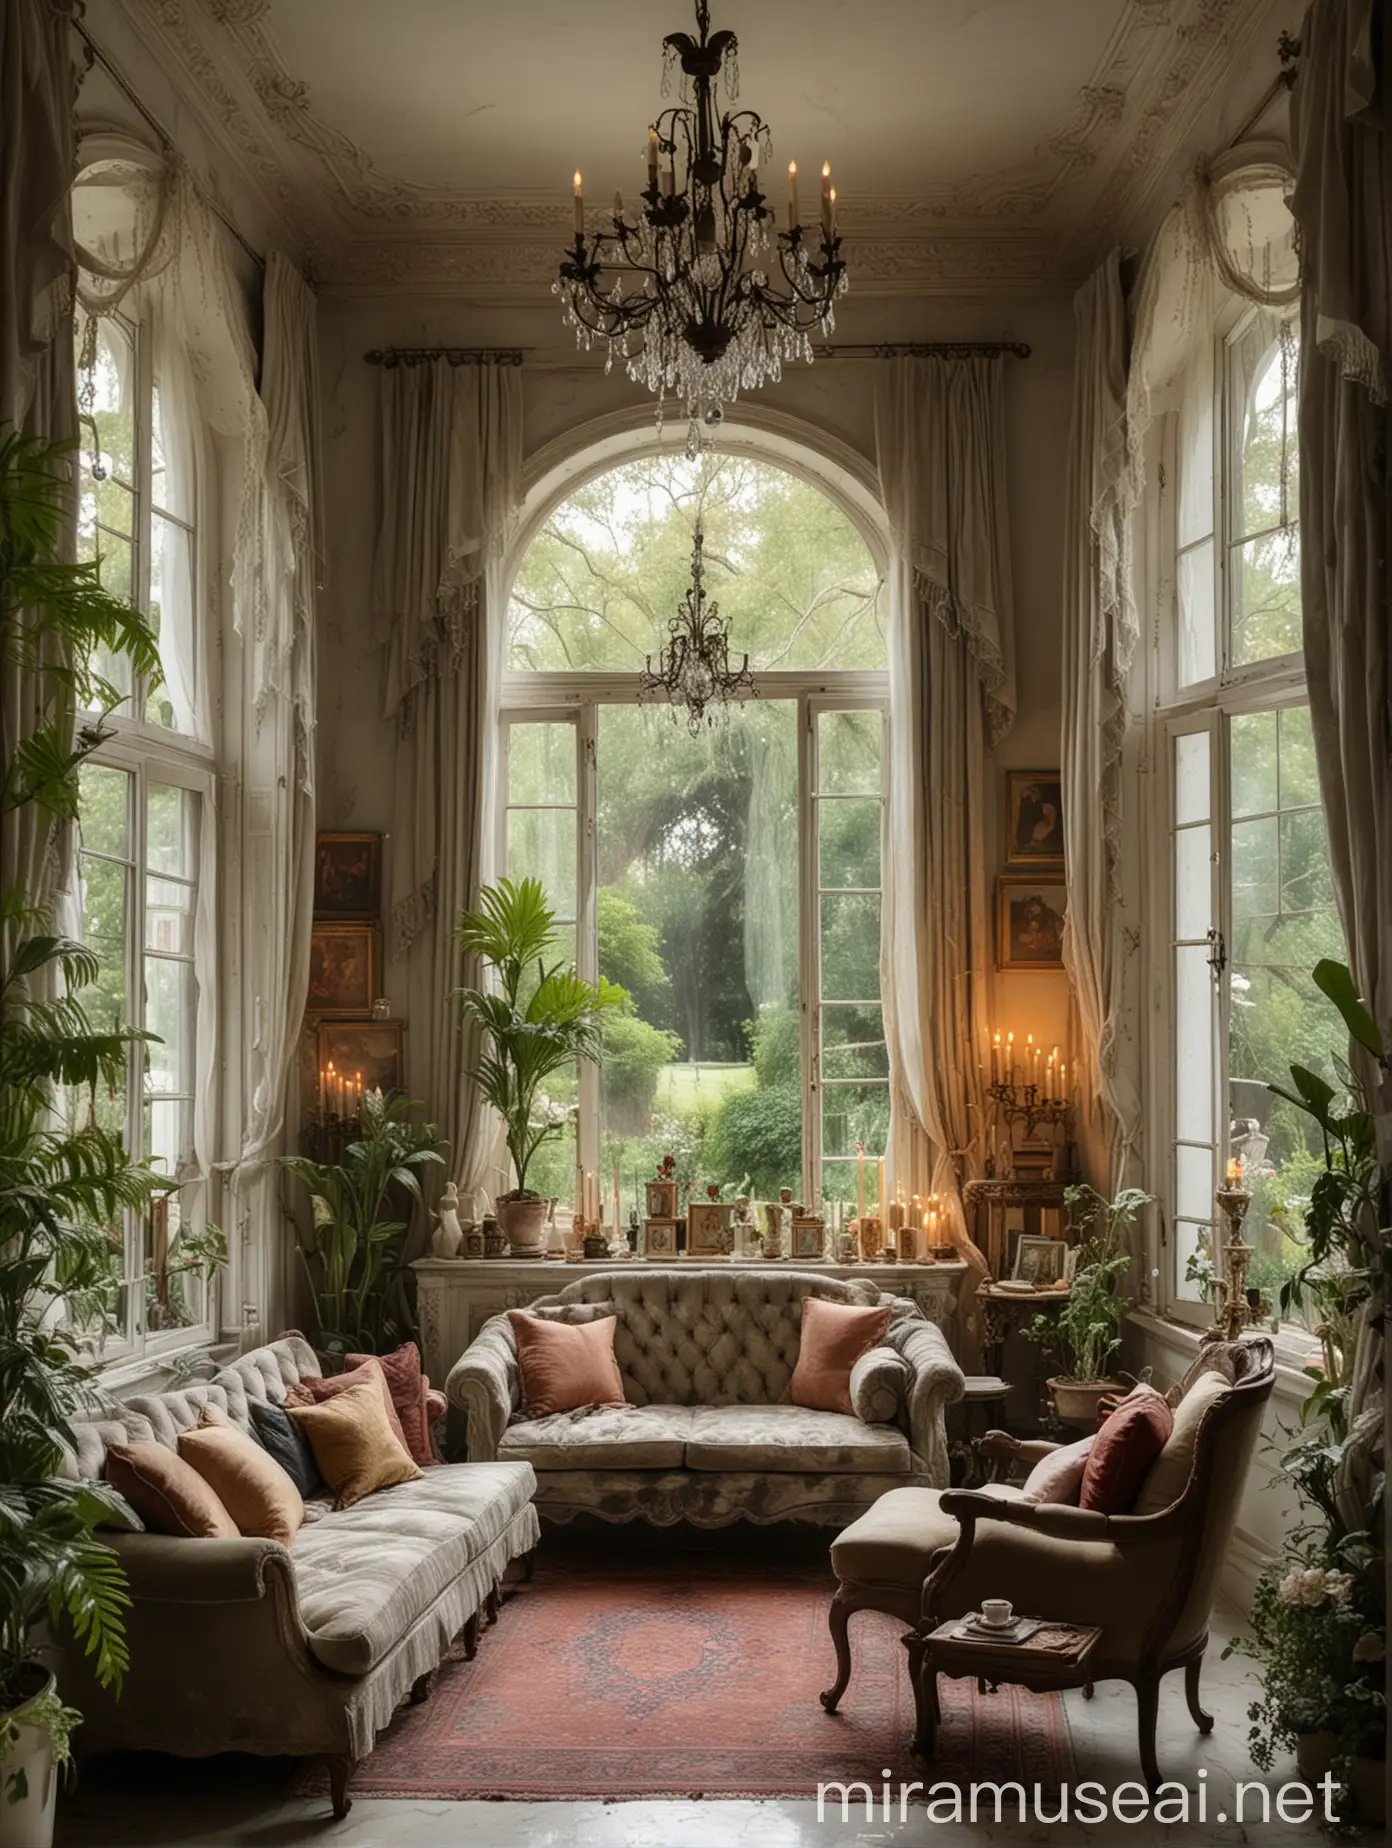 Elegant Interior with GardenInspired Dcor and Literary Touches